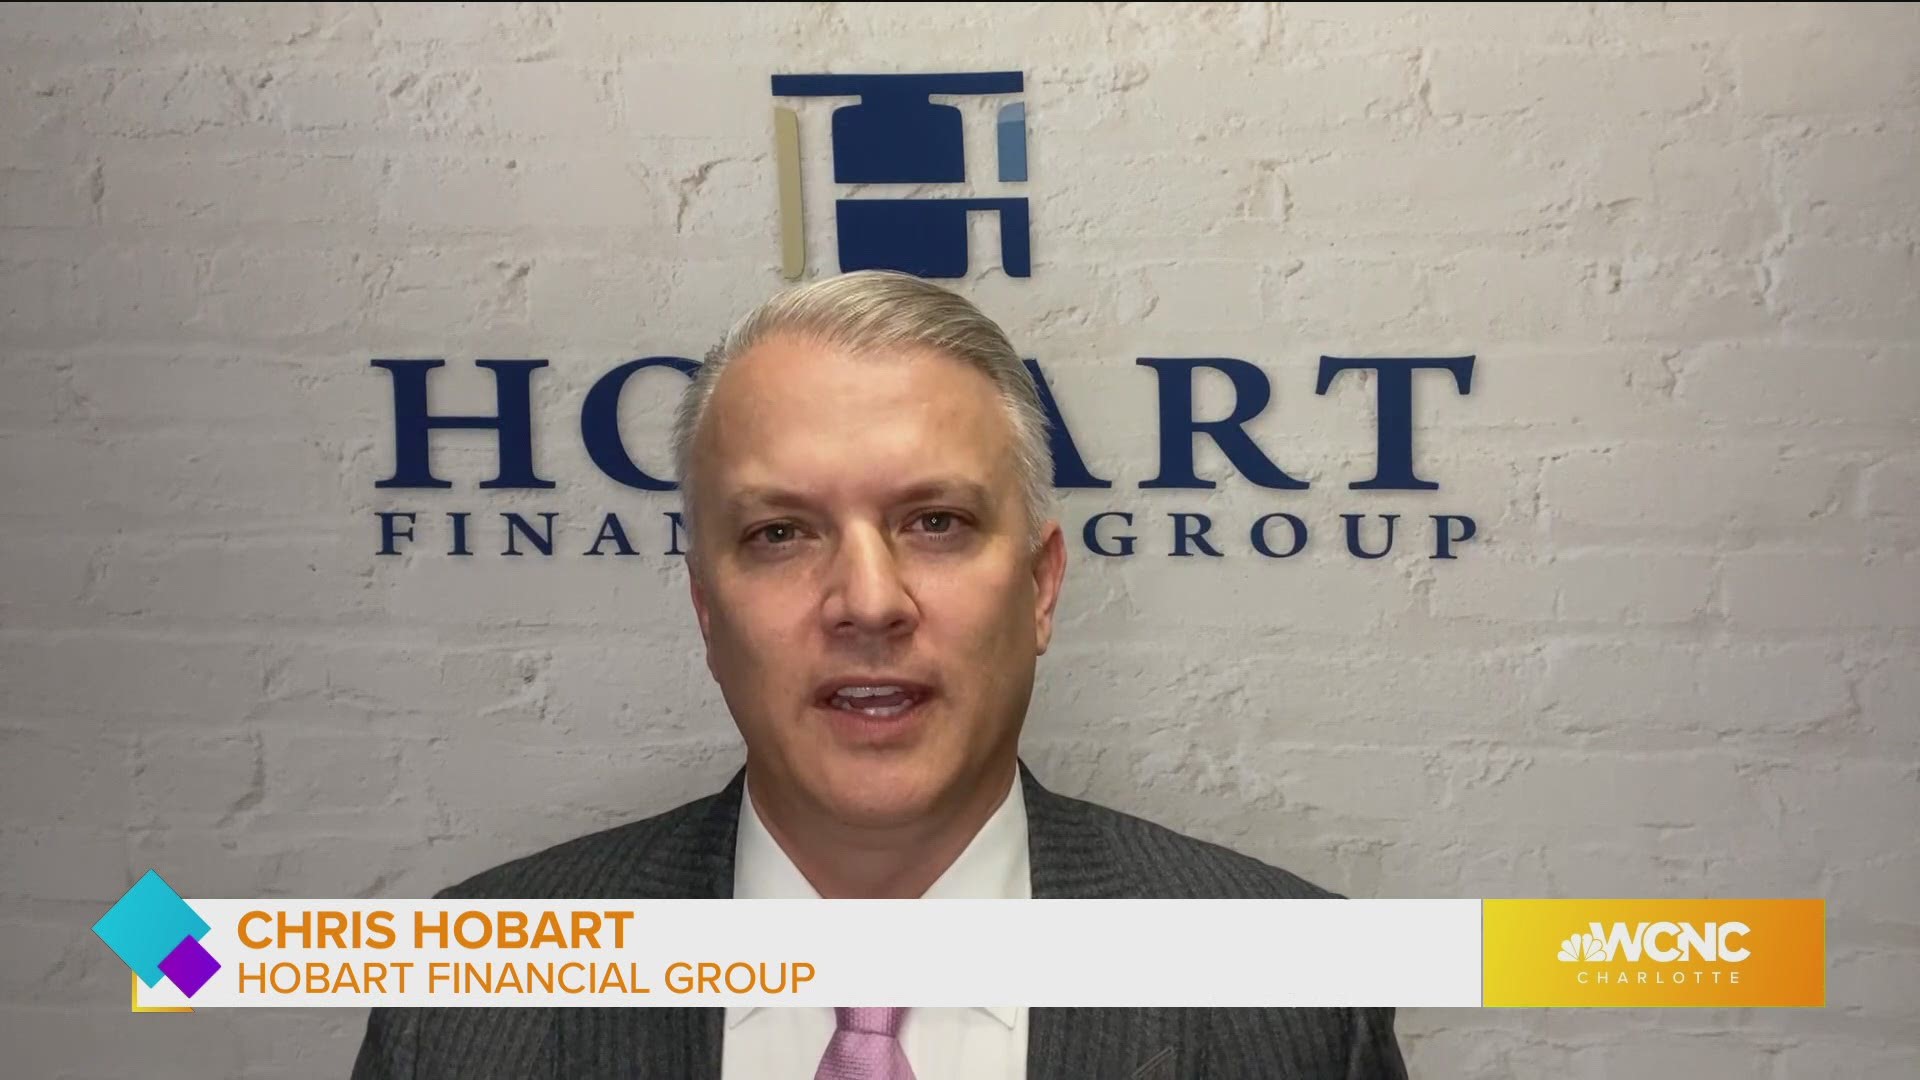 Hobart Financial Group shares tips to help investors manage money smartly